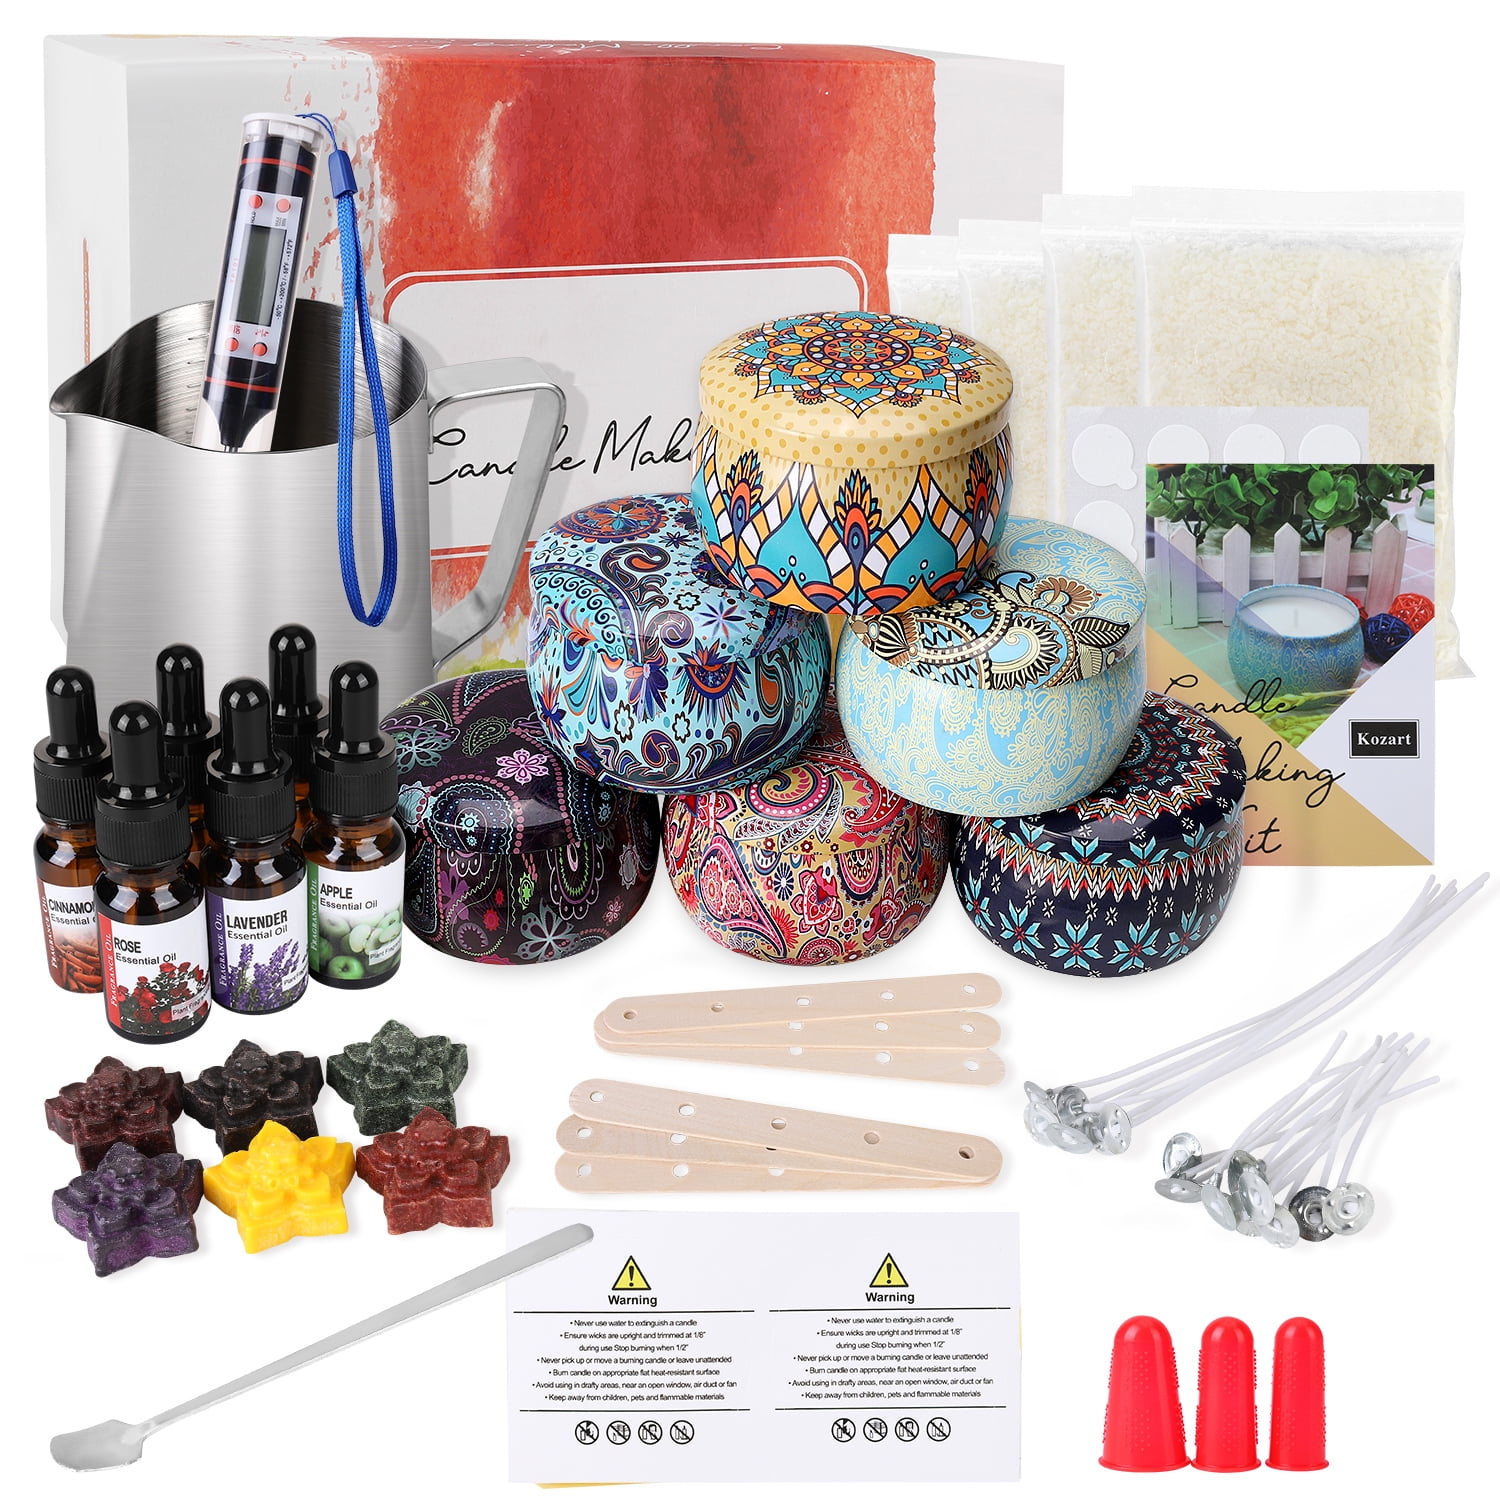 Sale Make 5 Different Types of Candle in 1 Candle Making Kit Perfect for Beginners Christmas Pudding Scent/Purple Dye